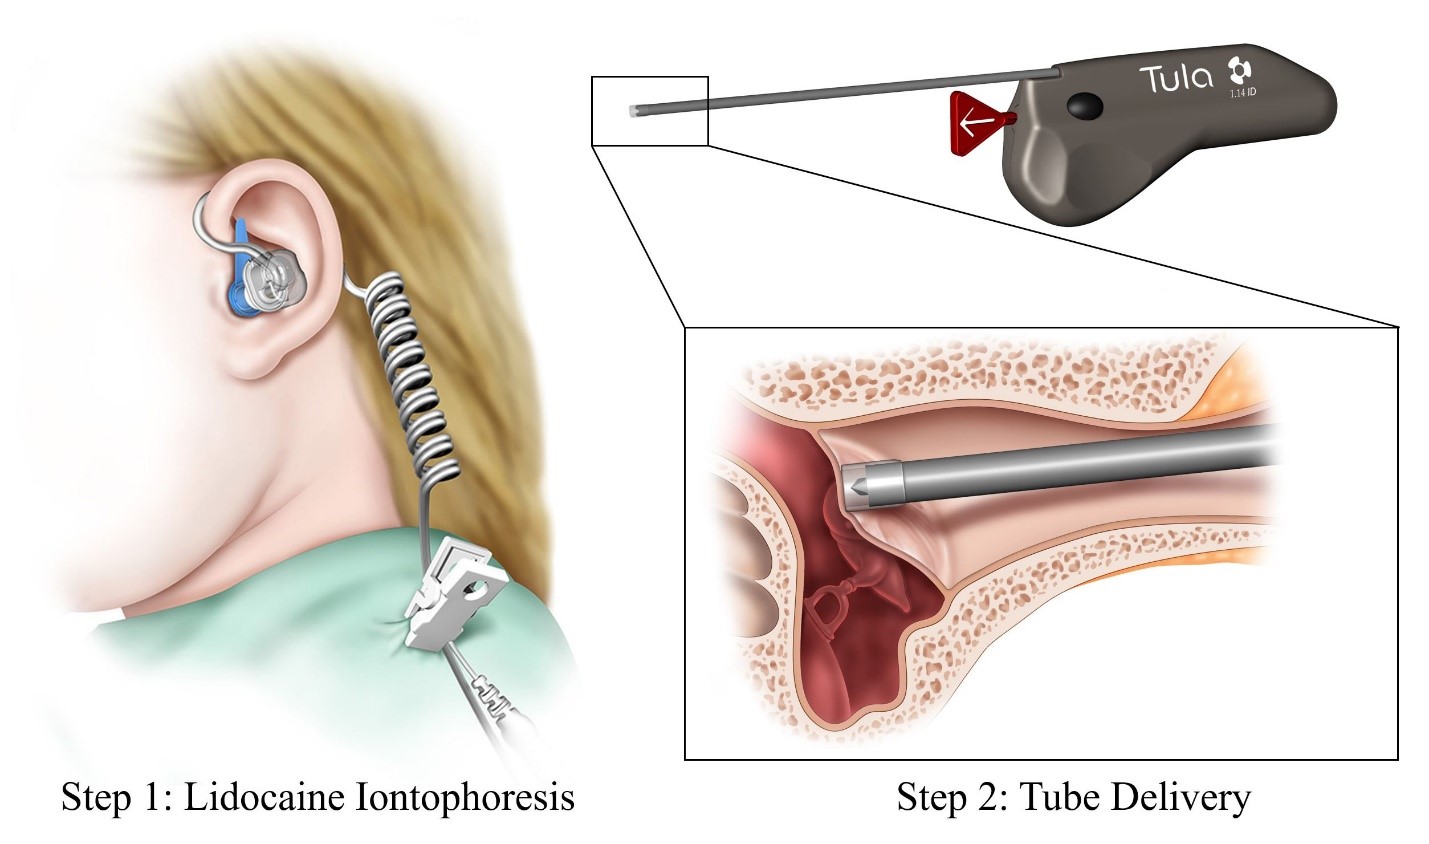 Tula® System showing Step 1: Lidocaine Iontophoresis and Step 2: Tube Delivery